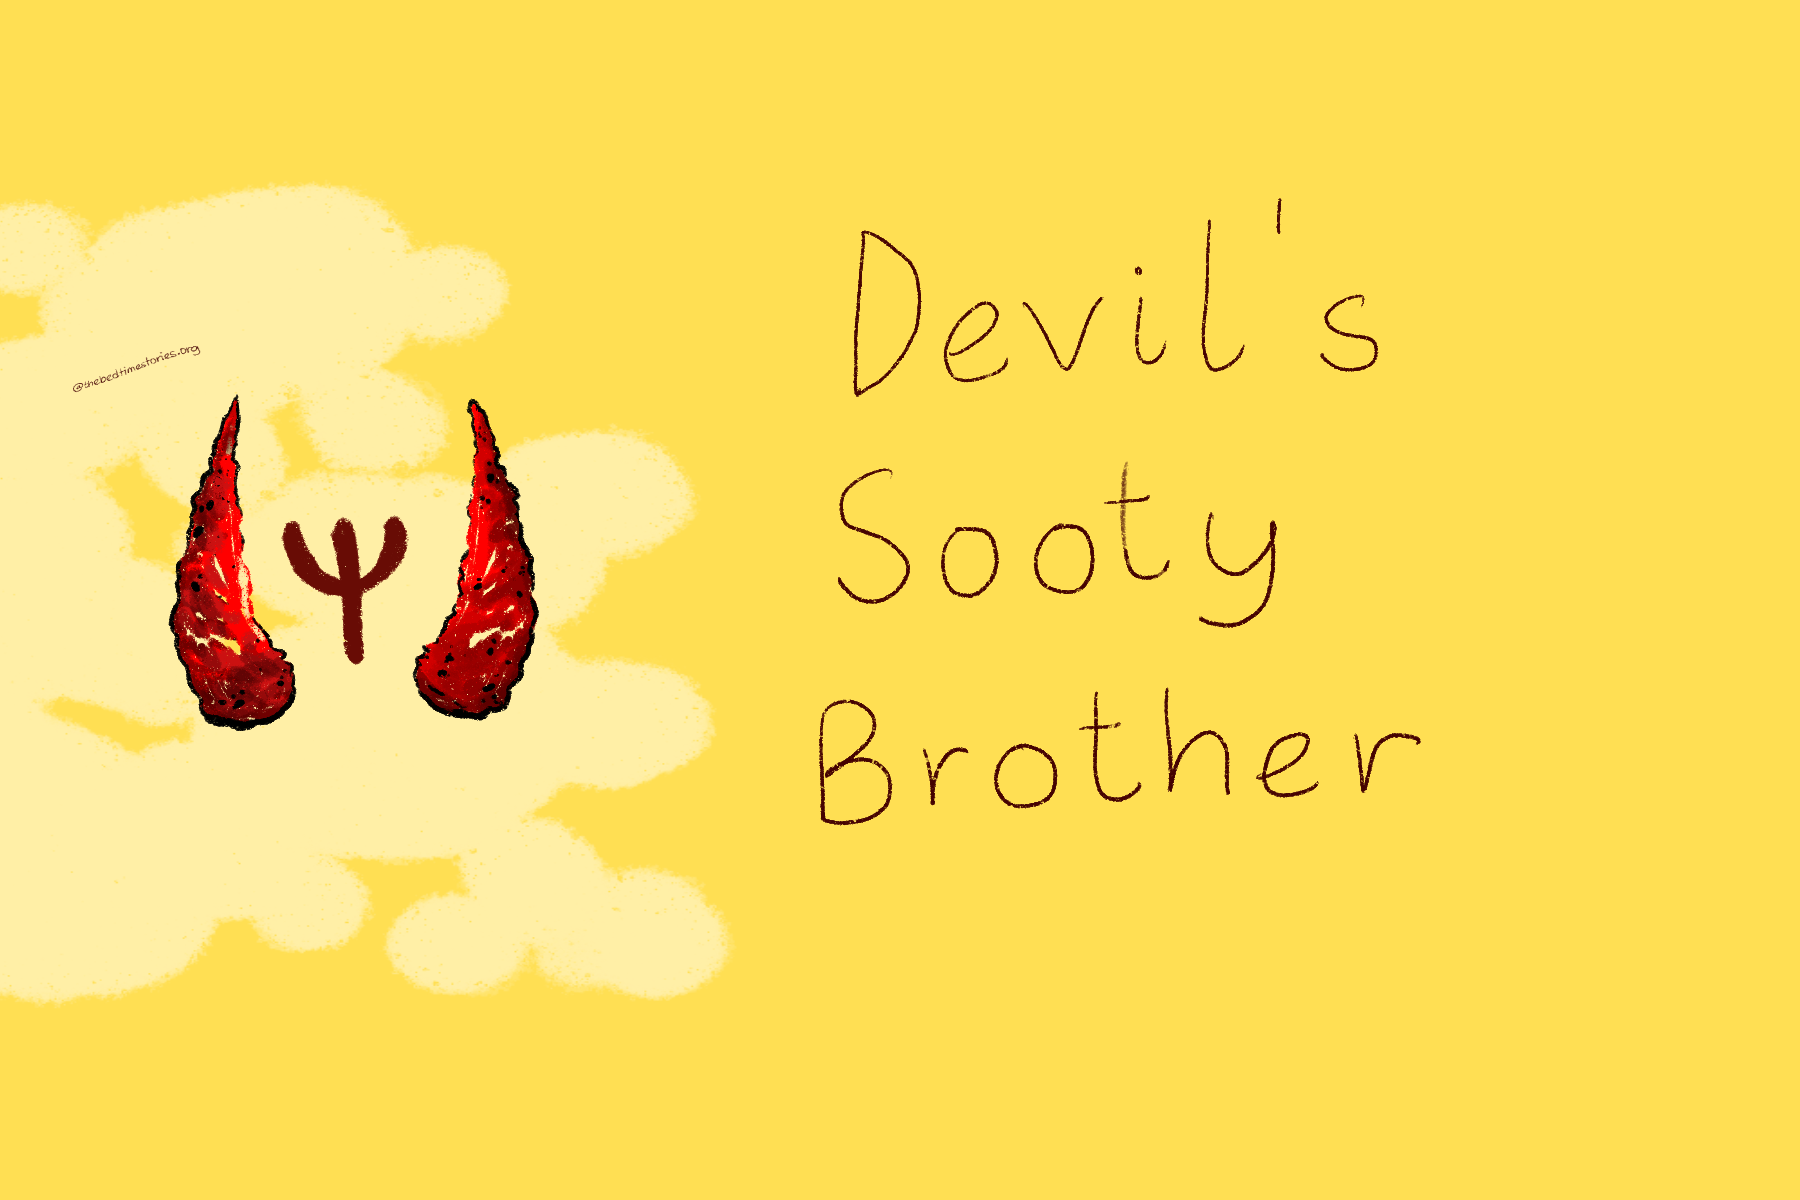 The Devil’s Sooty Brother: Top 25 Best Moral Stories